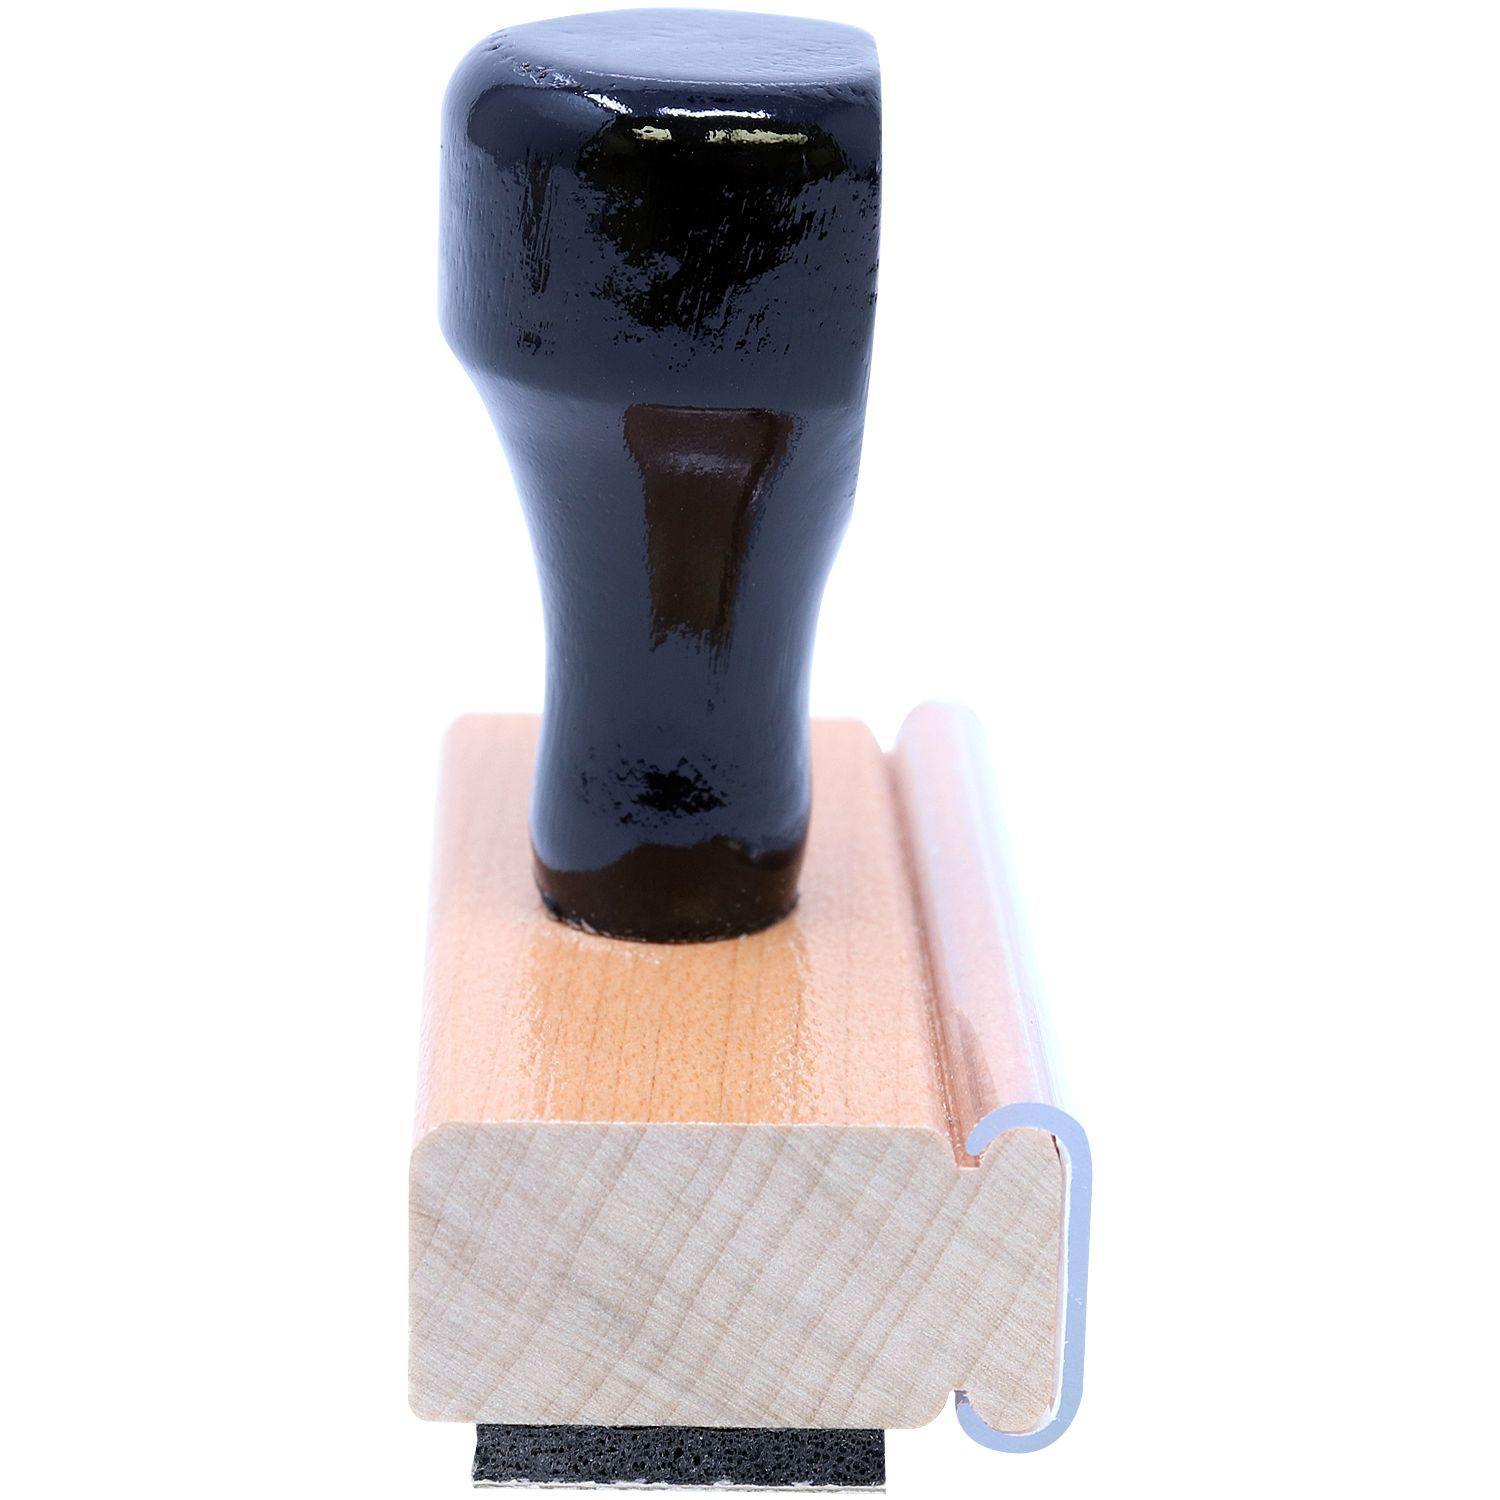 Side View of Large No Mail Receptacle Rubber Stamp Alt 1